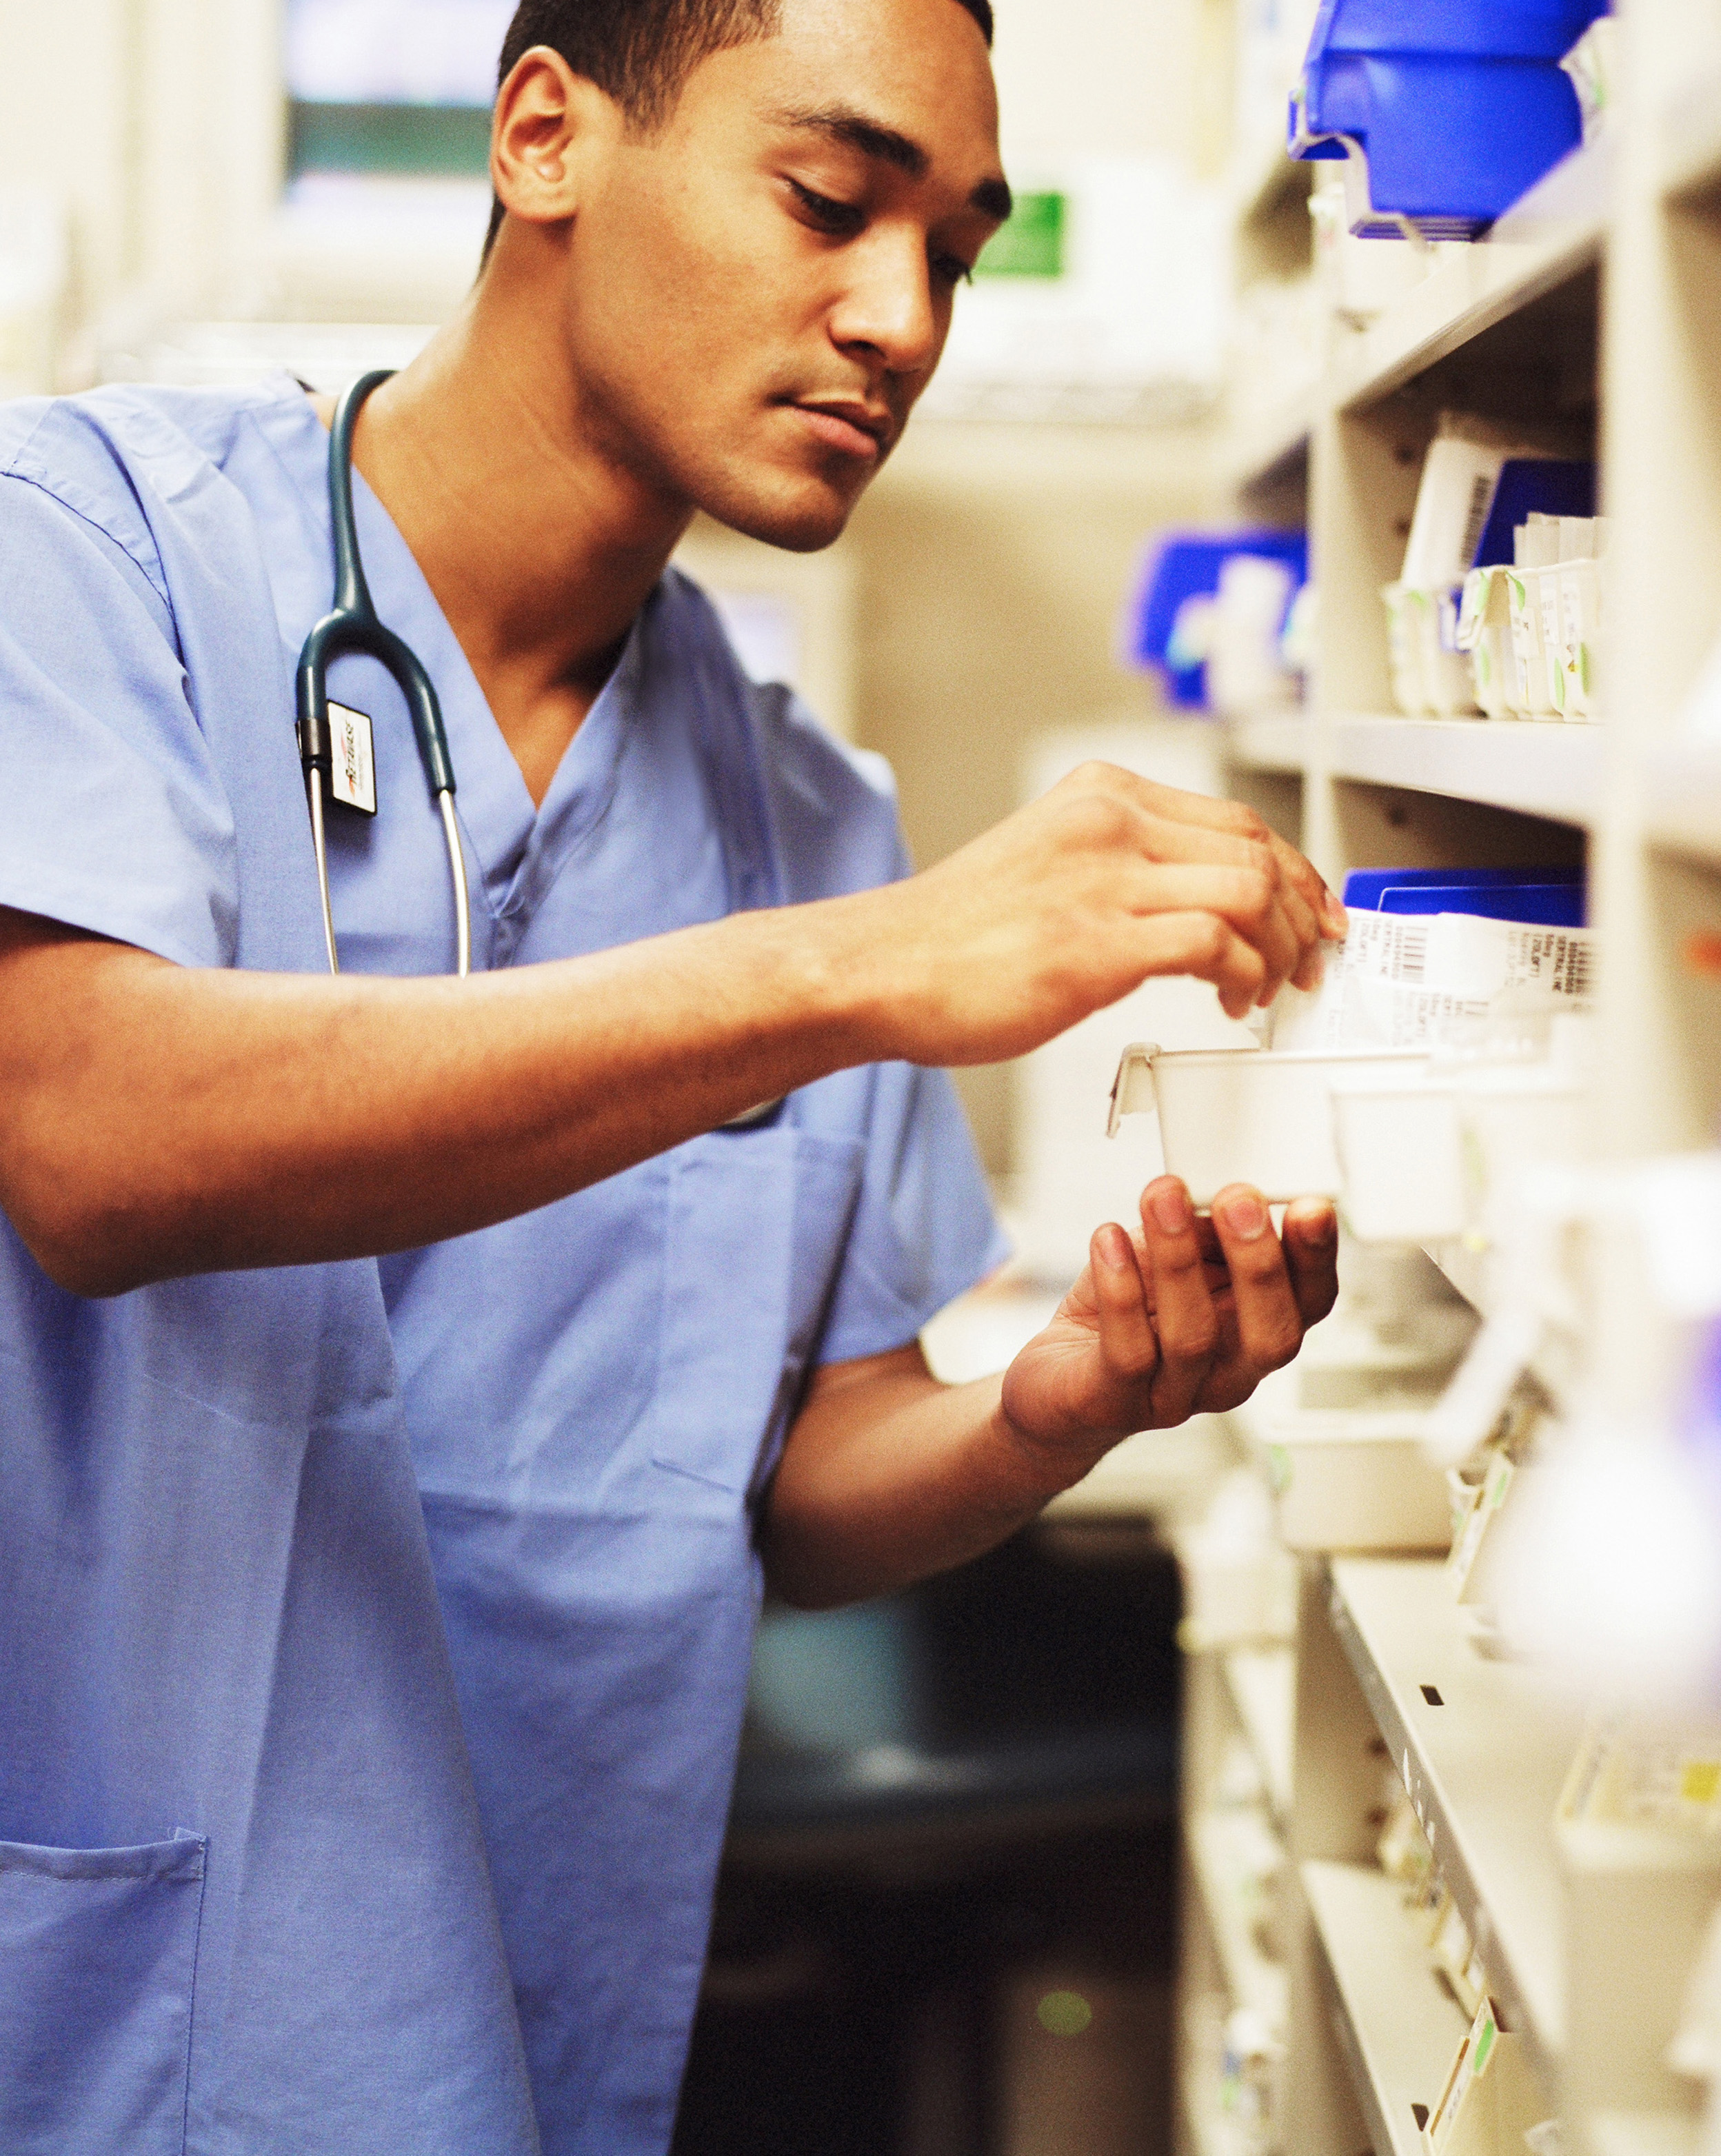 What is a pharmacy technician?